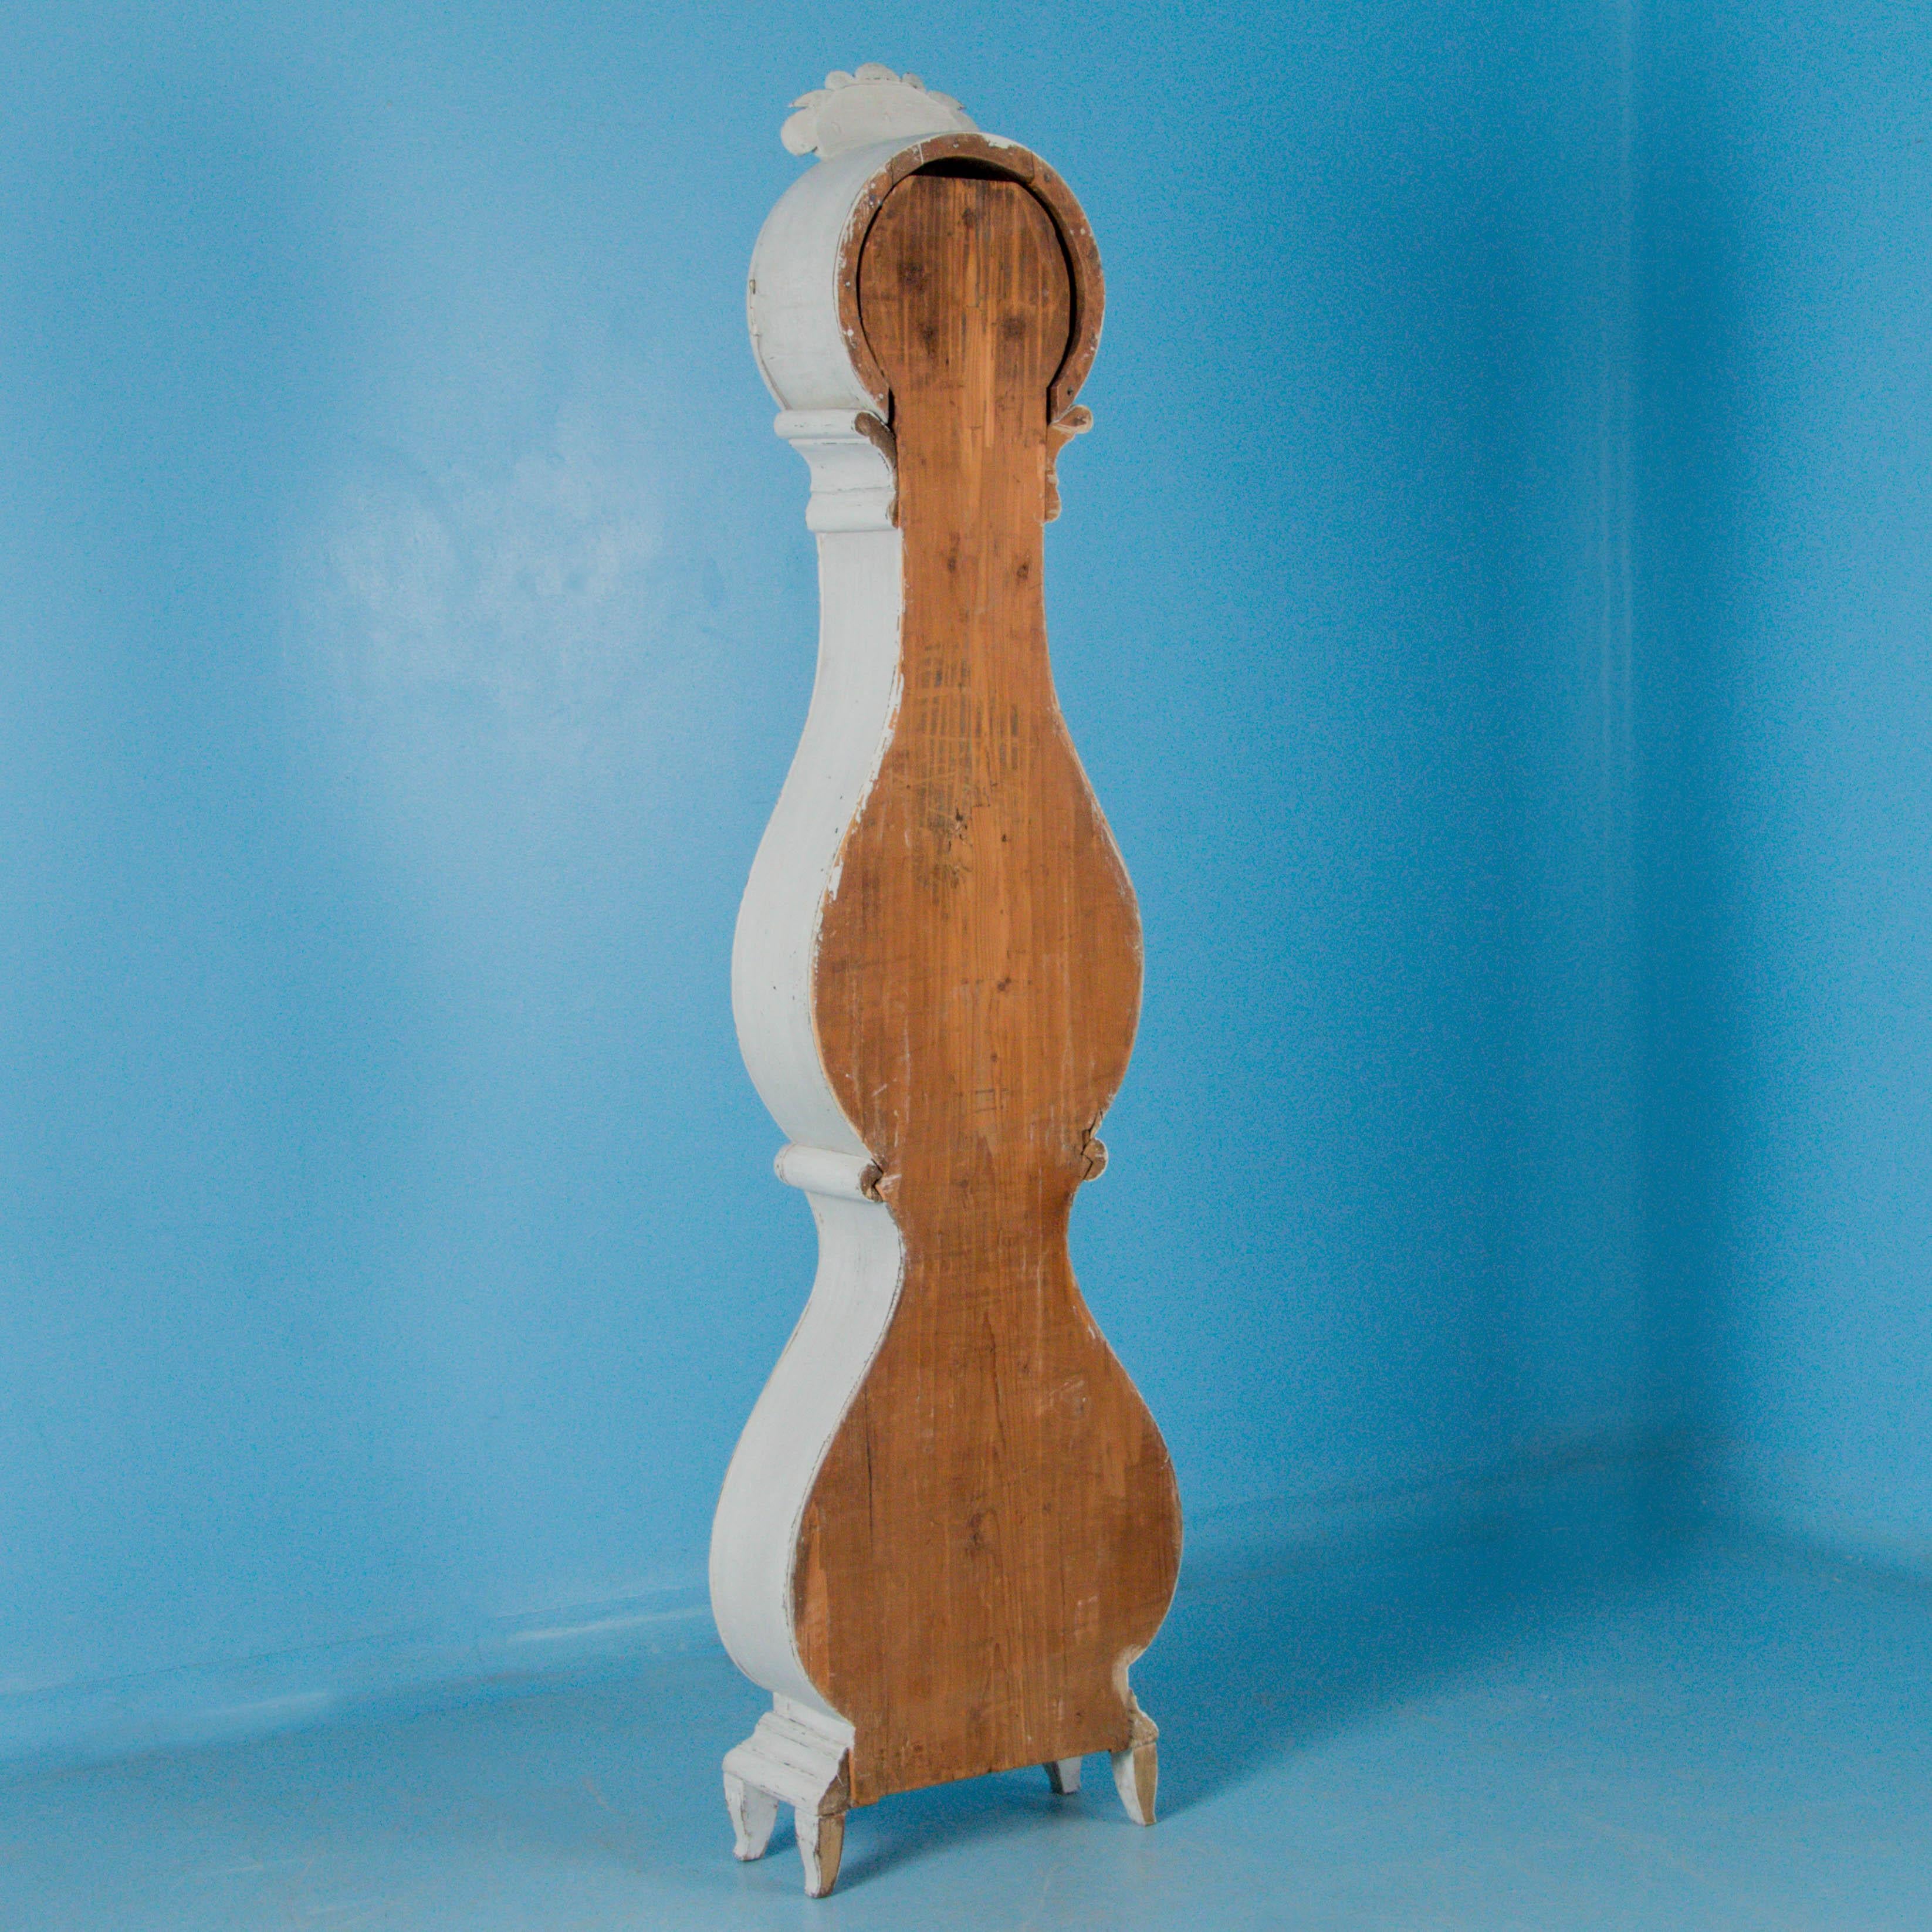 The off white painted finish compliments the Swedish styling of this grandfather clock from the famous region of Mora, Sweden. Please examine the close up photos to appreciate the painted finish with gentle distressing that was recently added, as